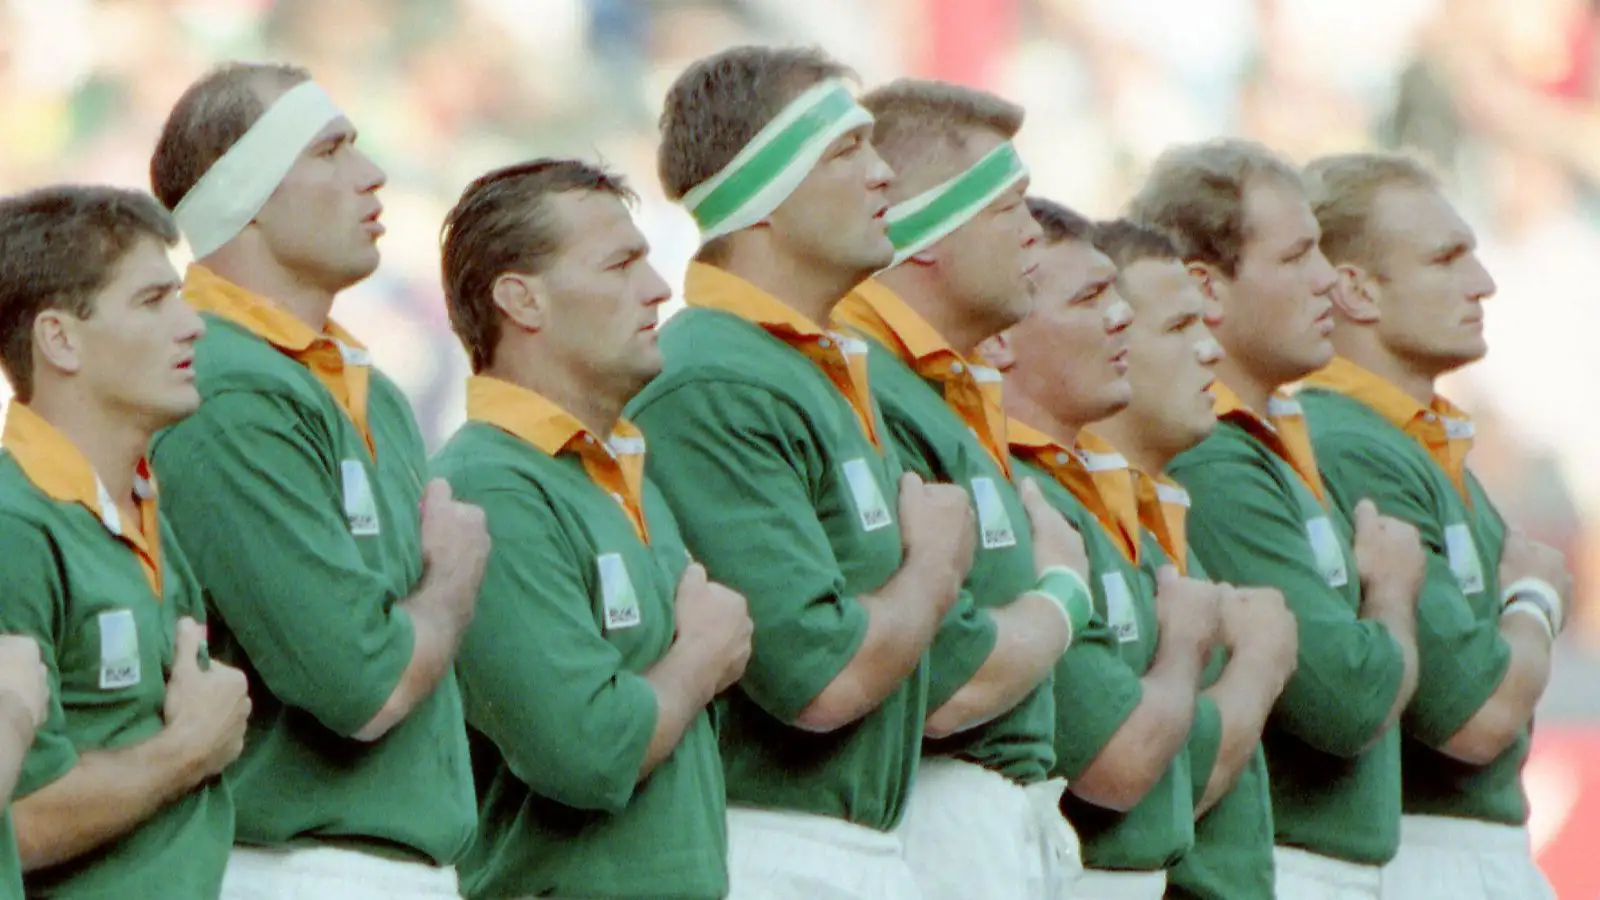 South African players during the national anthem before the start of the Rugby World Cup Final between South Africa and New Zealand at Ellis Park, Johannesburg in 1995 with Hannes Strydom pictured alongside Kobus Wiese.